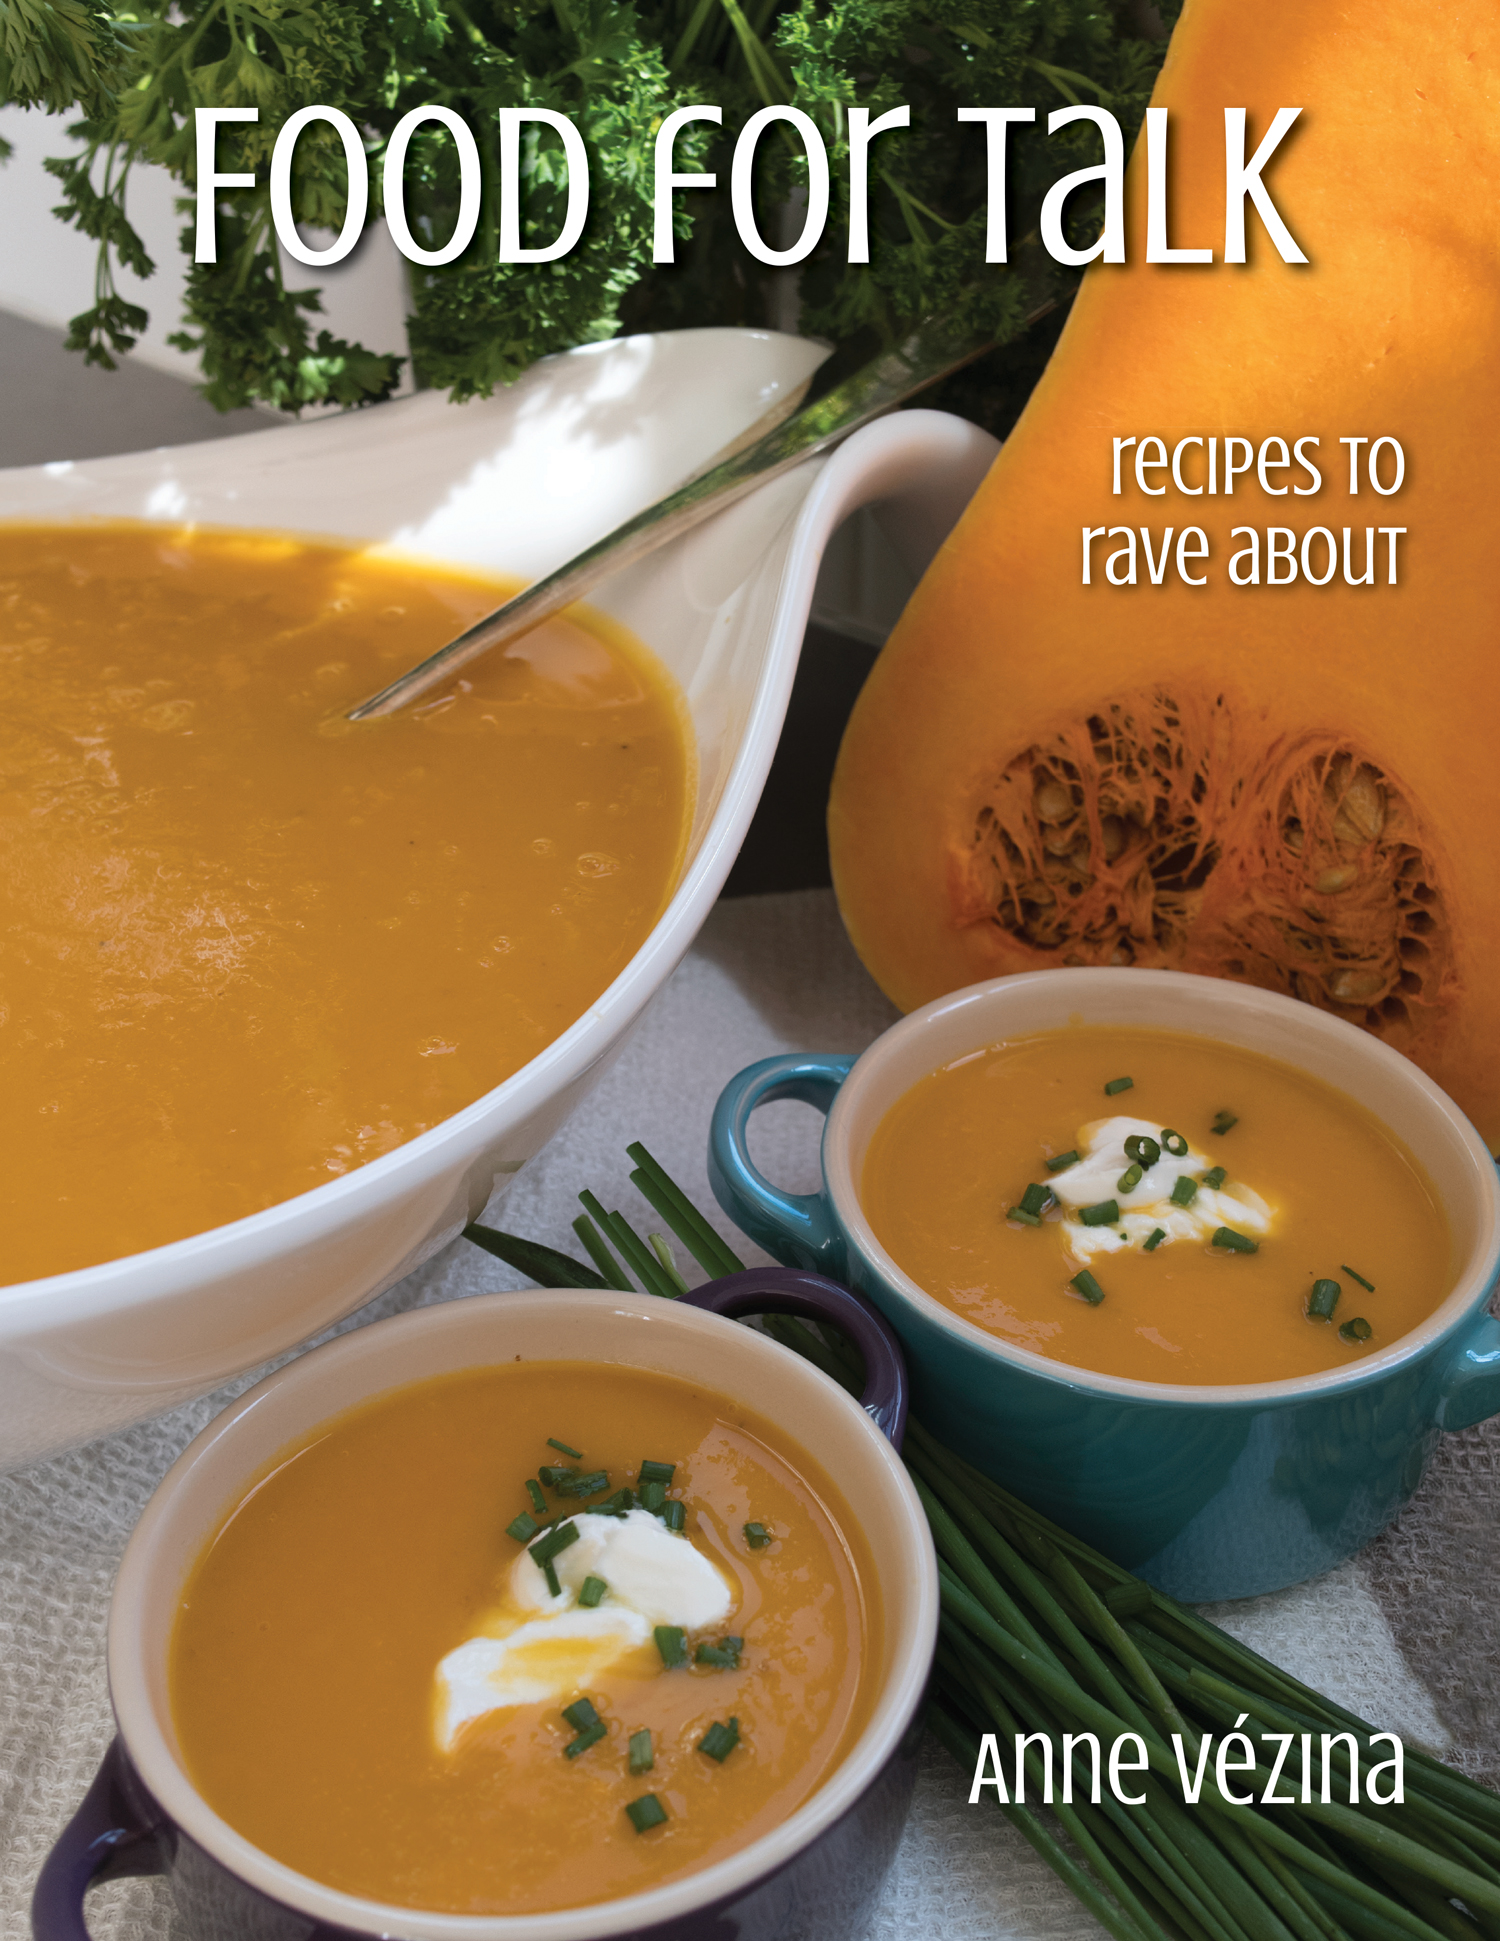 FOOD FOR TALK - Recipes to rave about